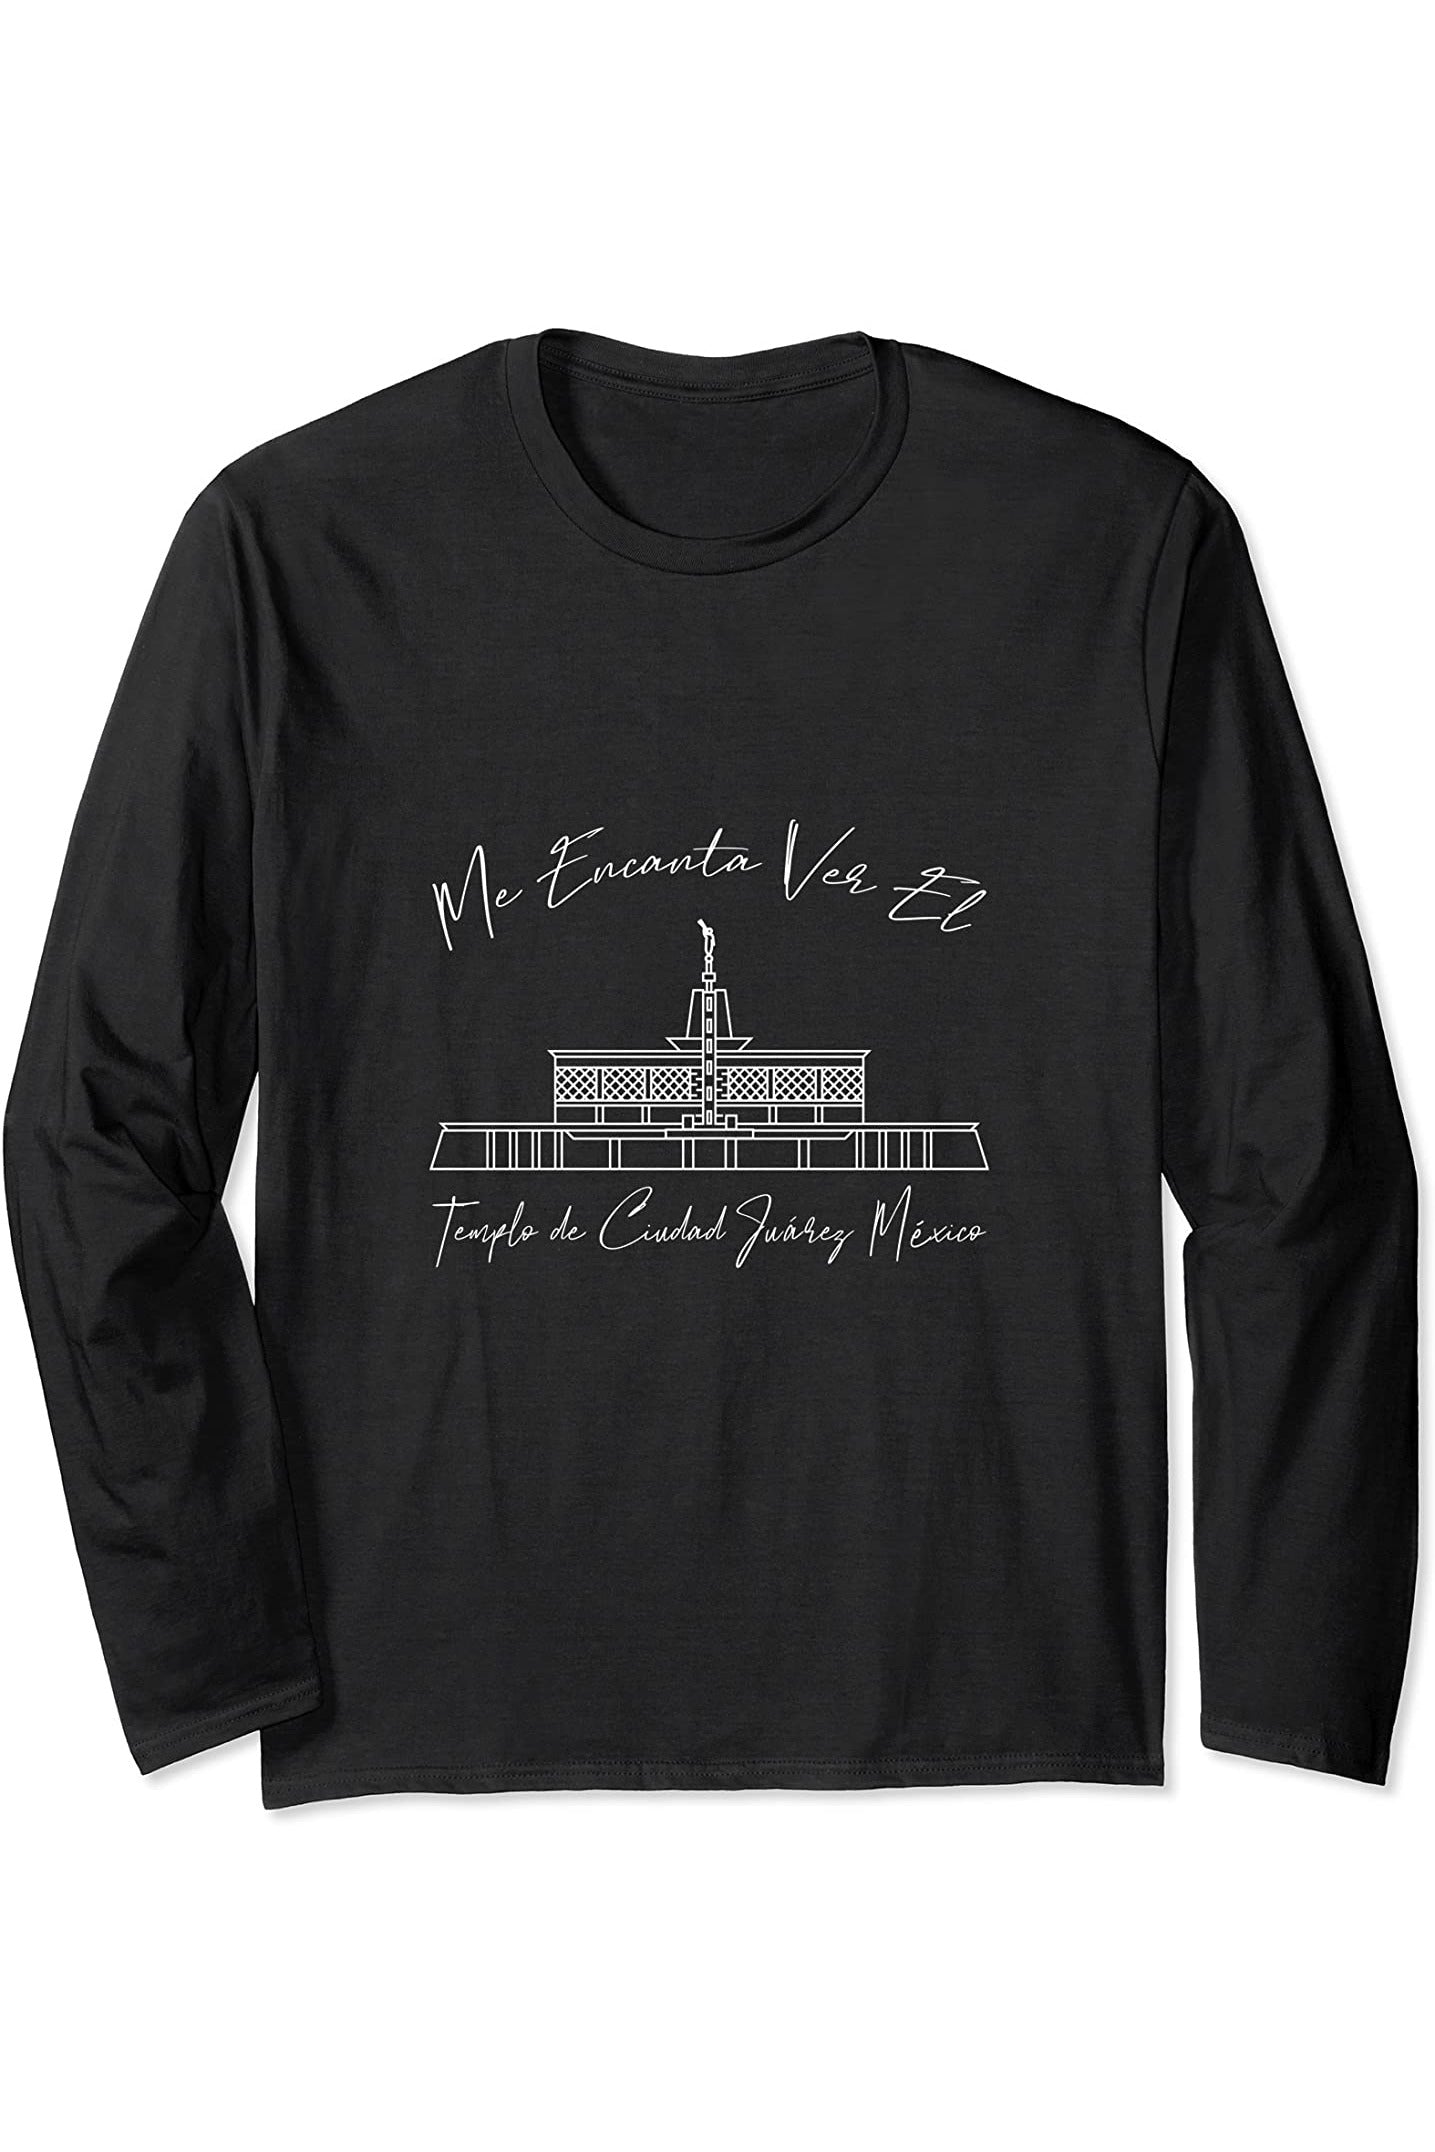 Mexico City Mexico Temple Long Sleeve T-Shirt - Calligraphy Style (Spanish) US